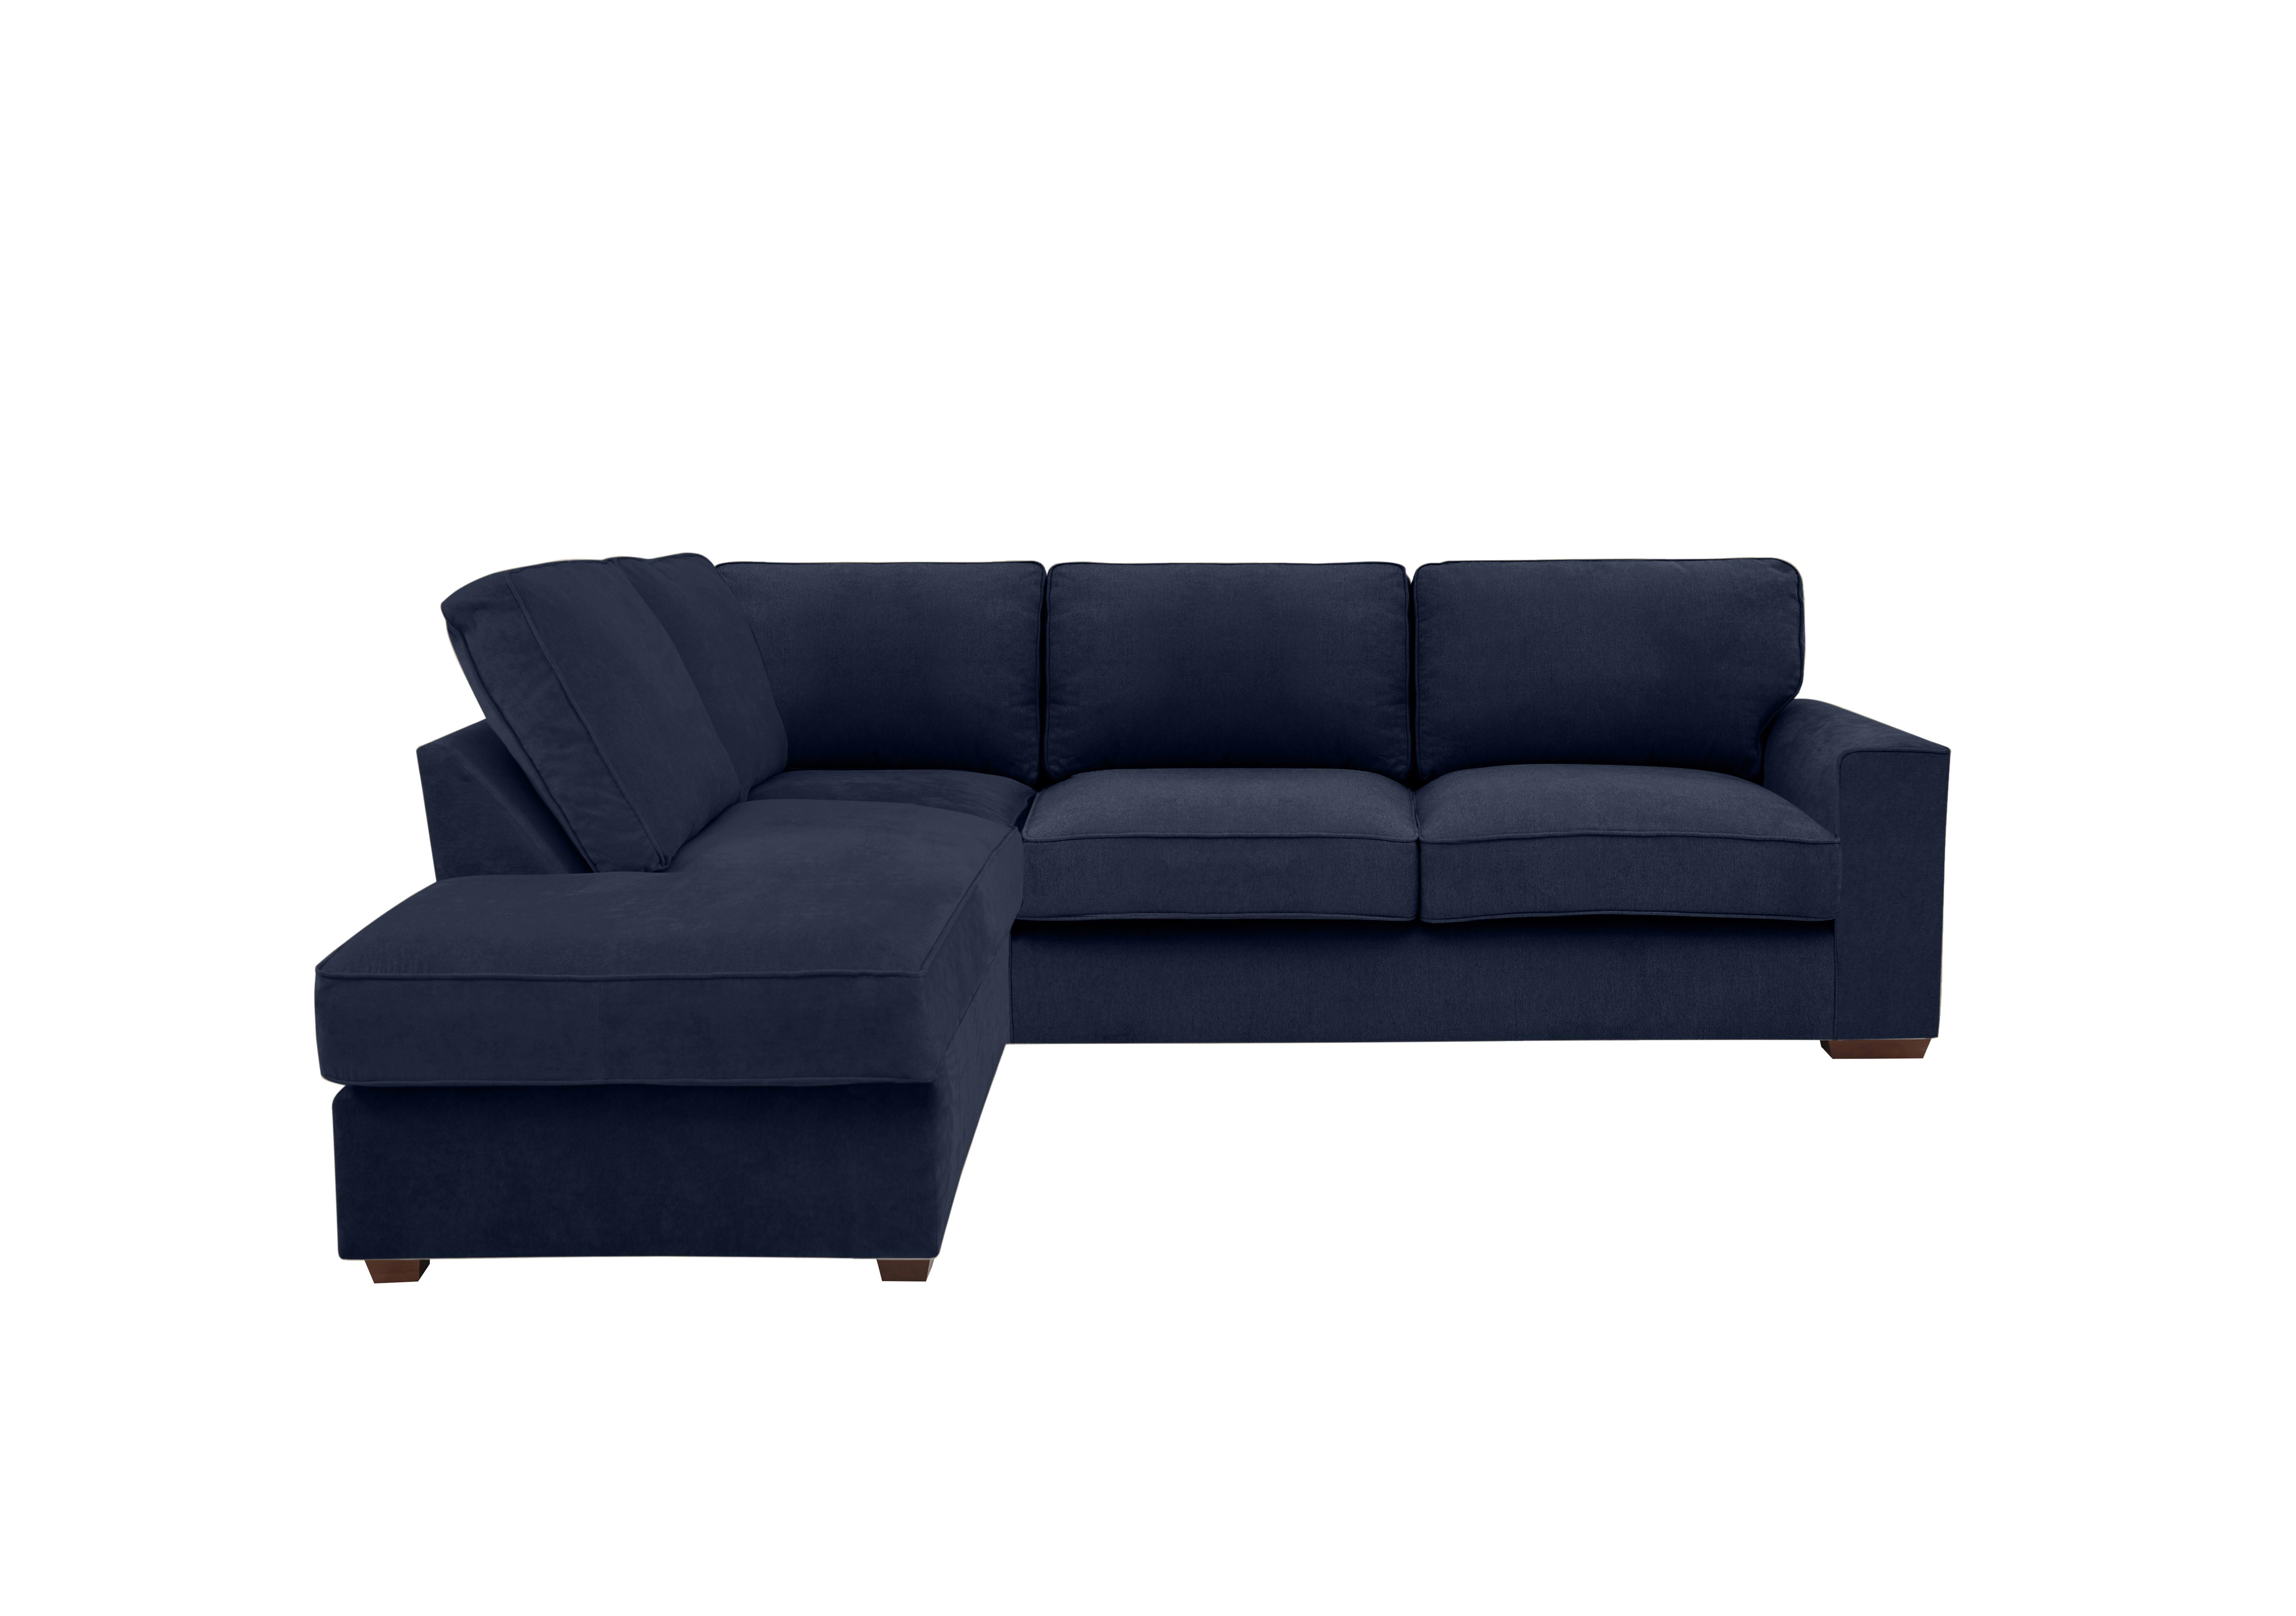 Cory Fabric Corner Chaise Classic Back Sofa Bed in Cosmo Navy on Furniture Village